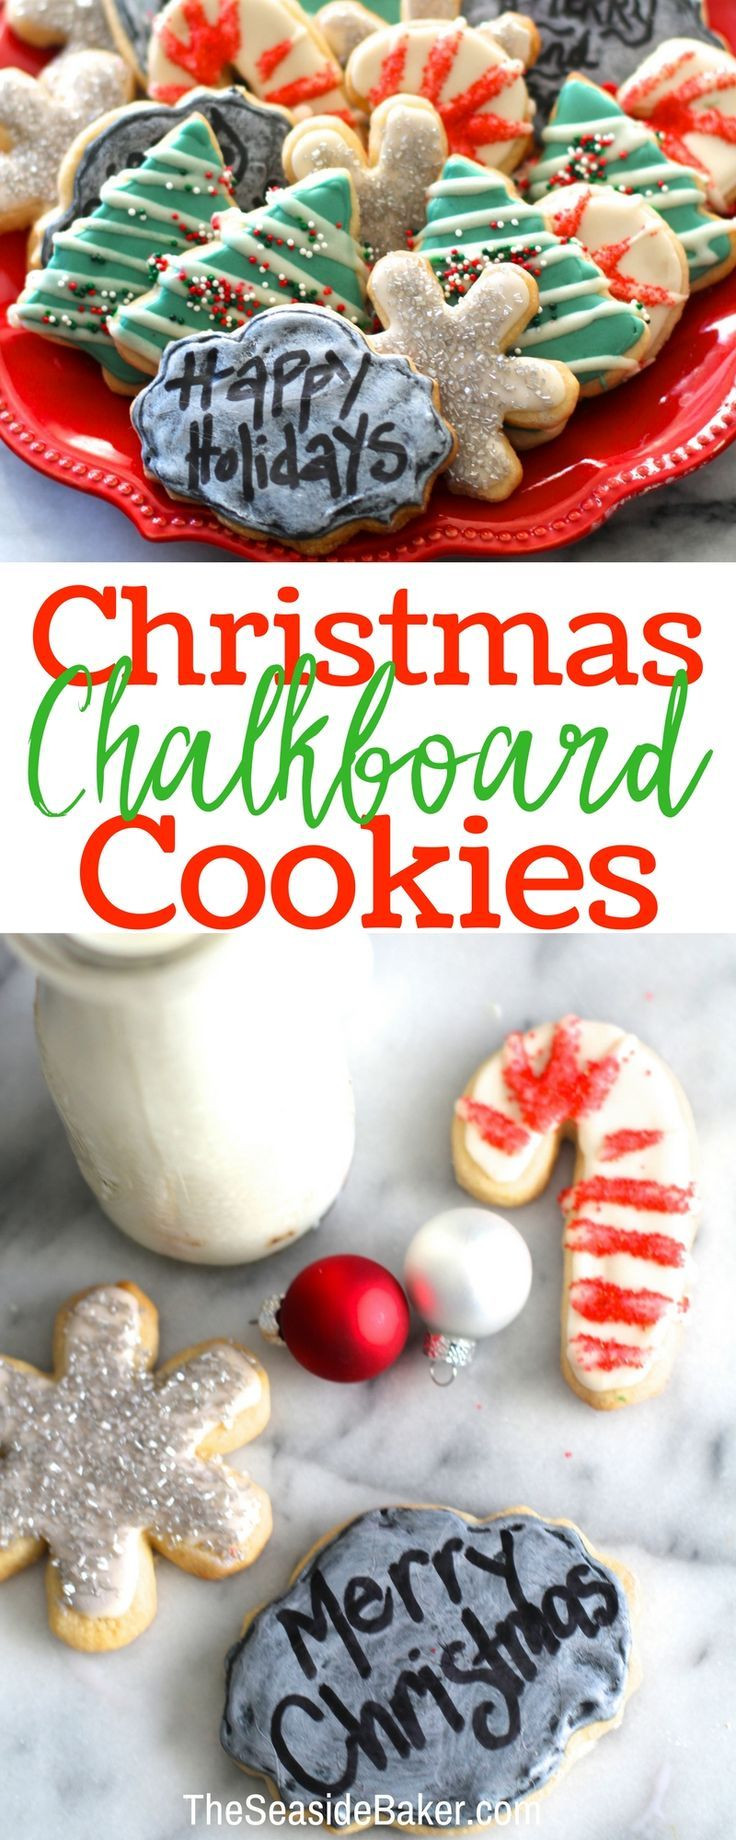 Send Christmas Cookies
 1878 best Easy Christmas Cookie Recipes images on